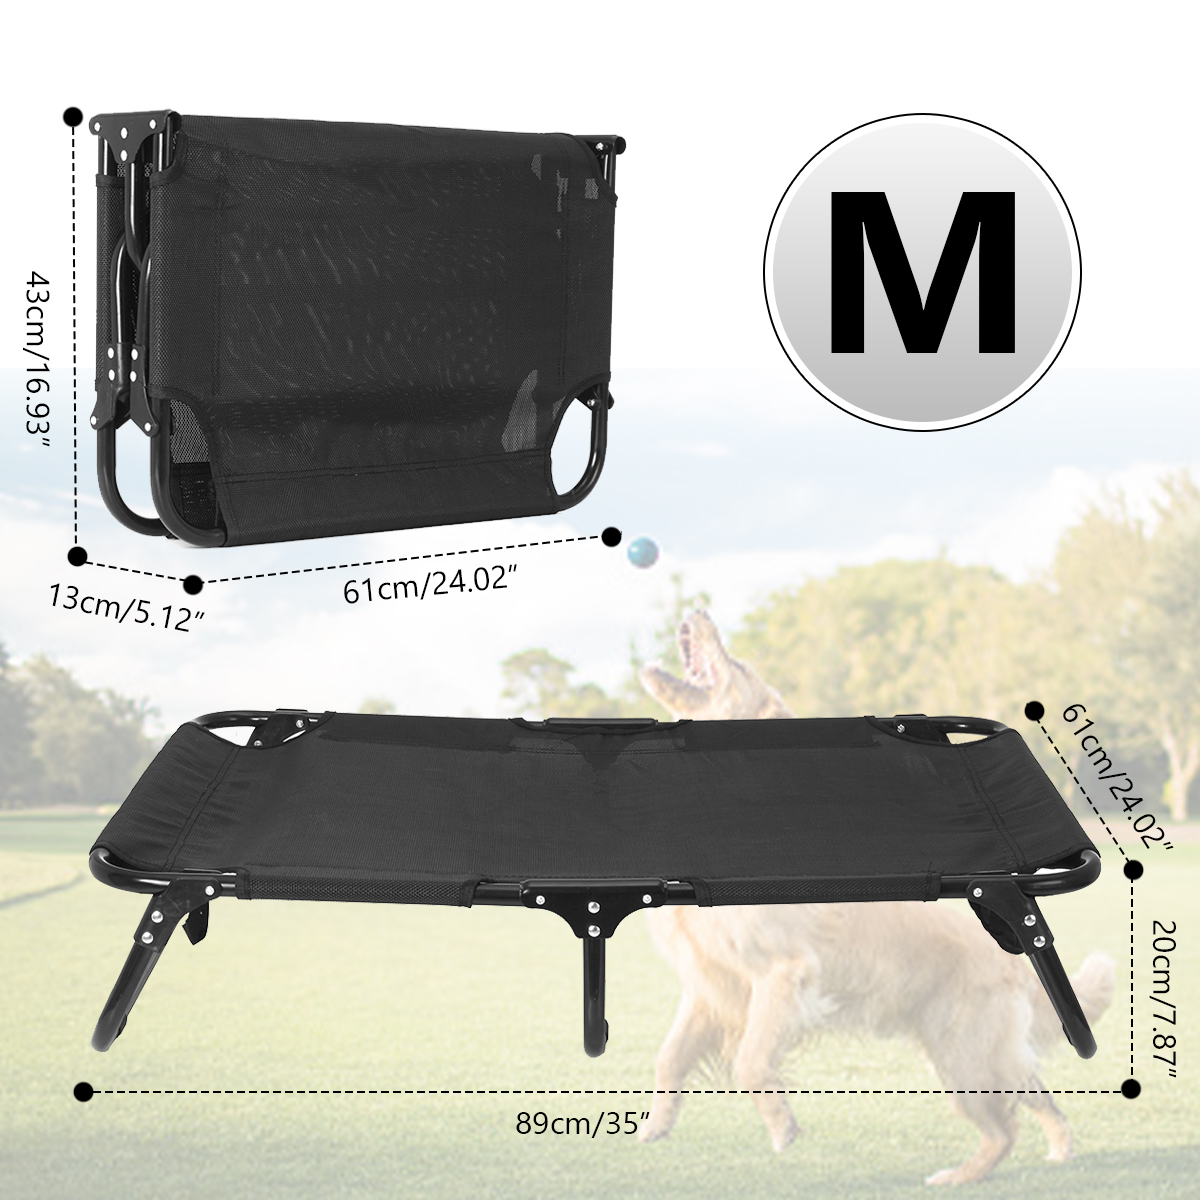 Elevated-Pet-Bed-Dog-Cat-Cooling-Lounger-Folding-Breathable-Mesh-Mat-Foldable-Removable-1958678-8